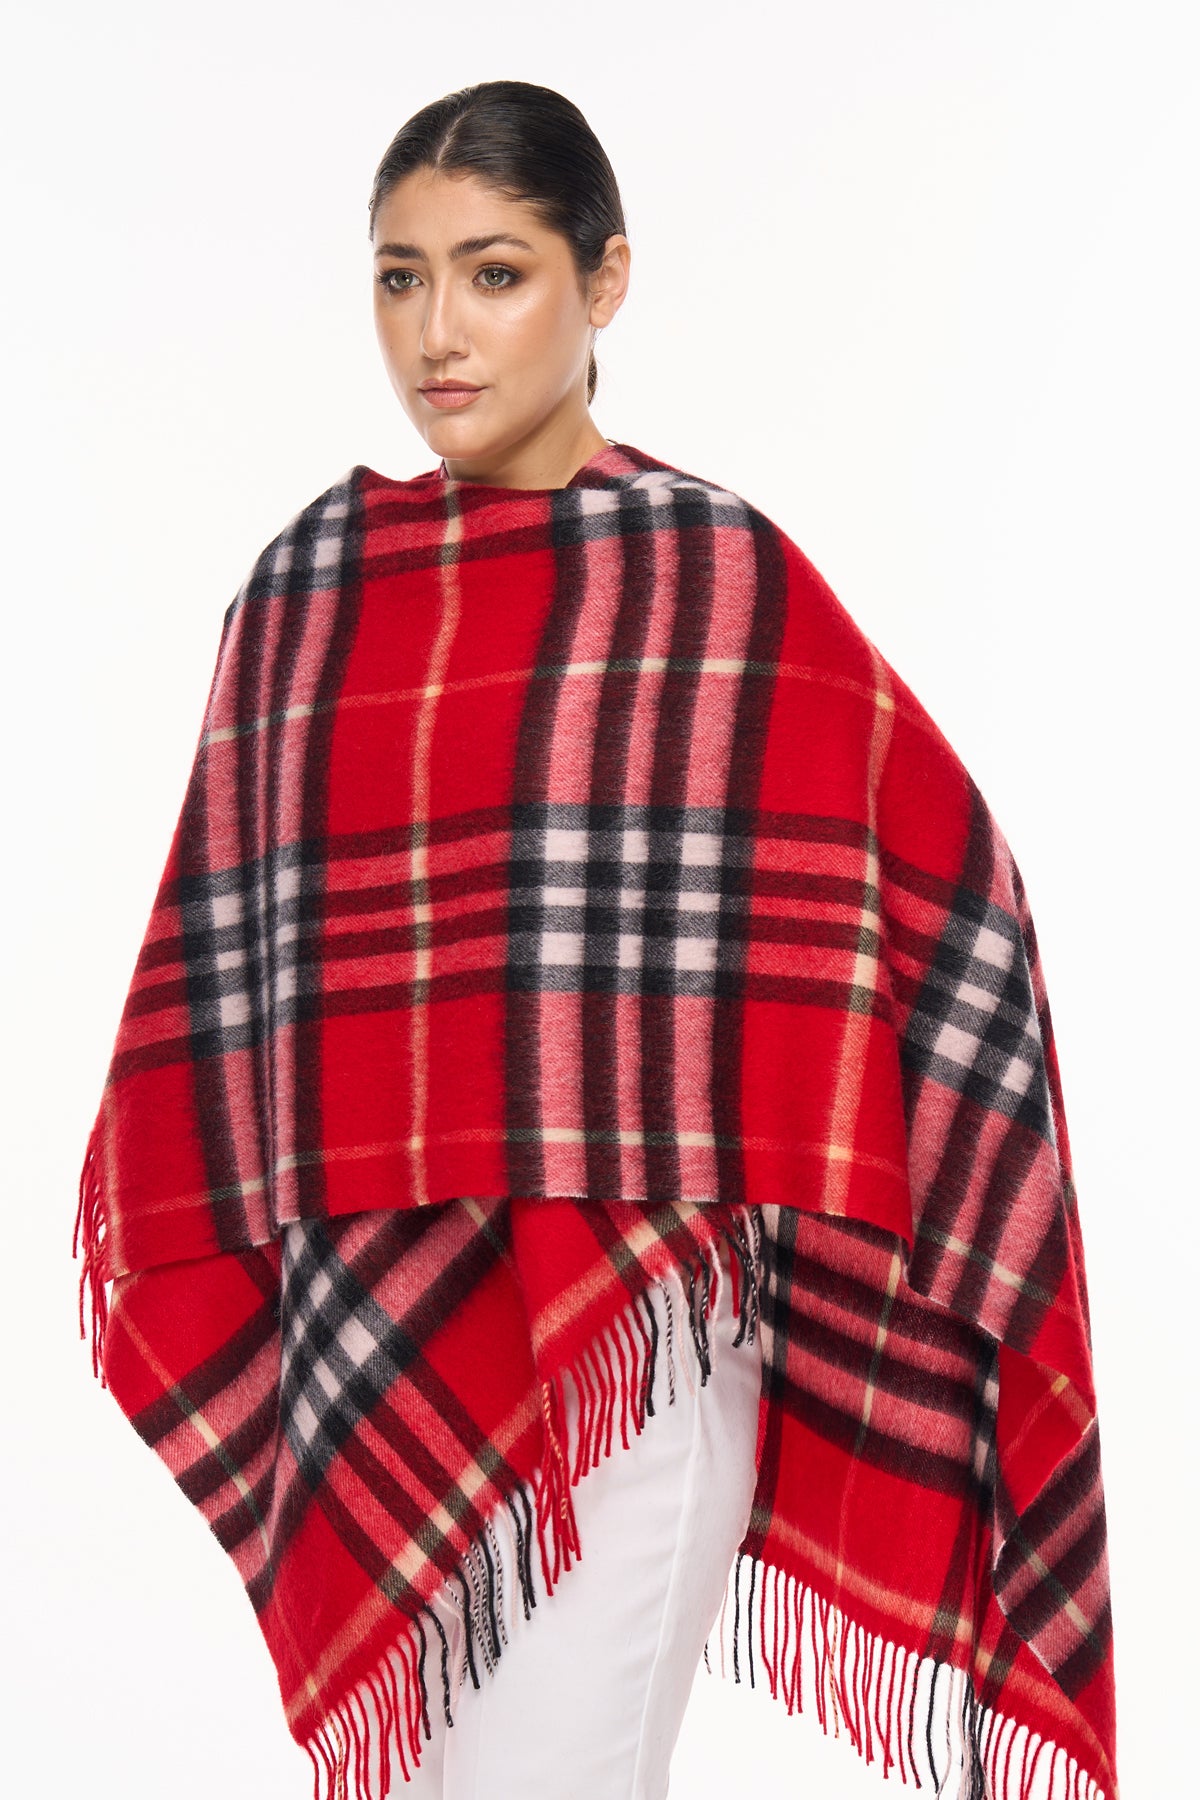 Cape DC Classic Red Poncho 100% Pure Lambswool